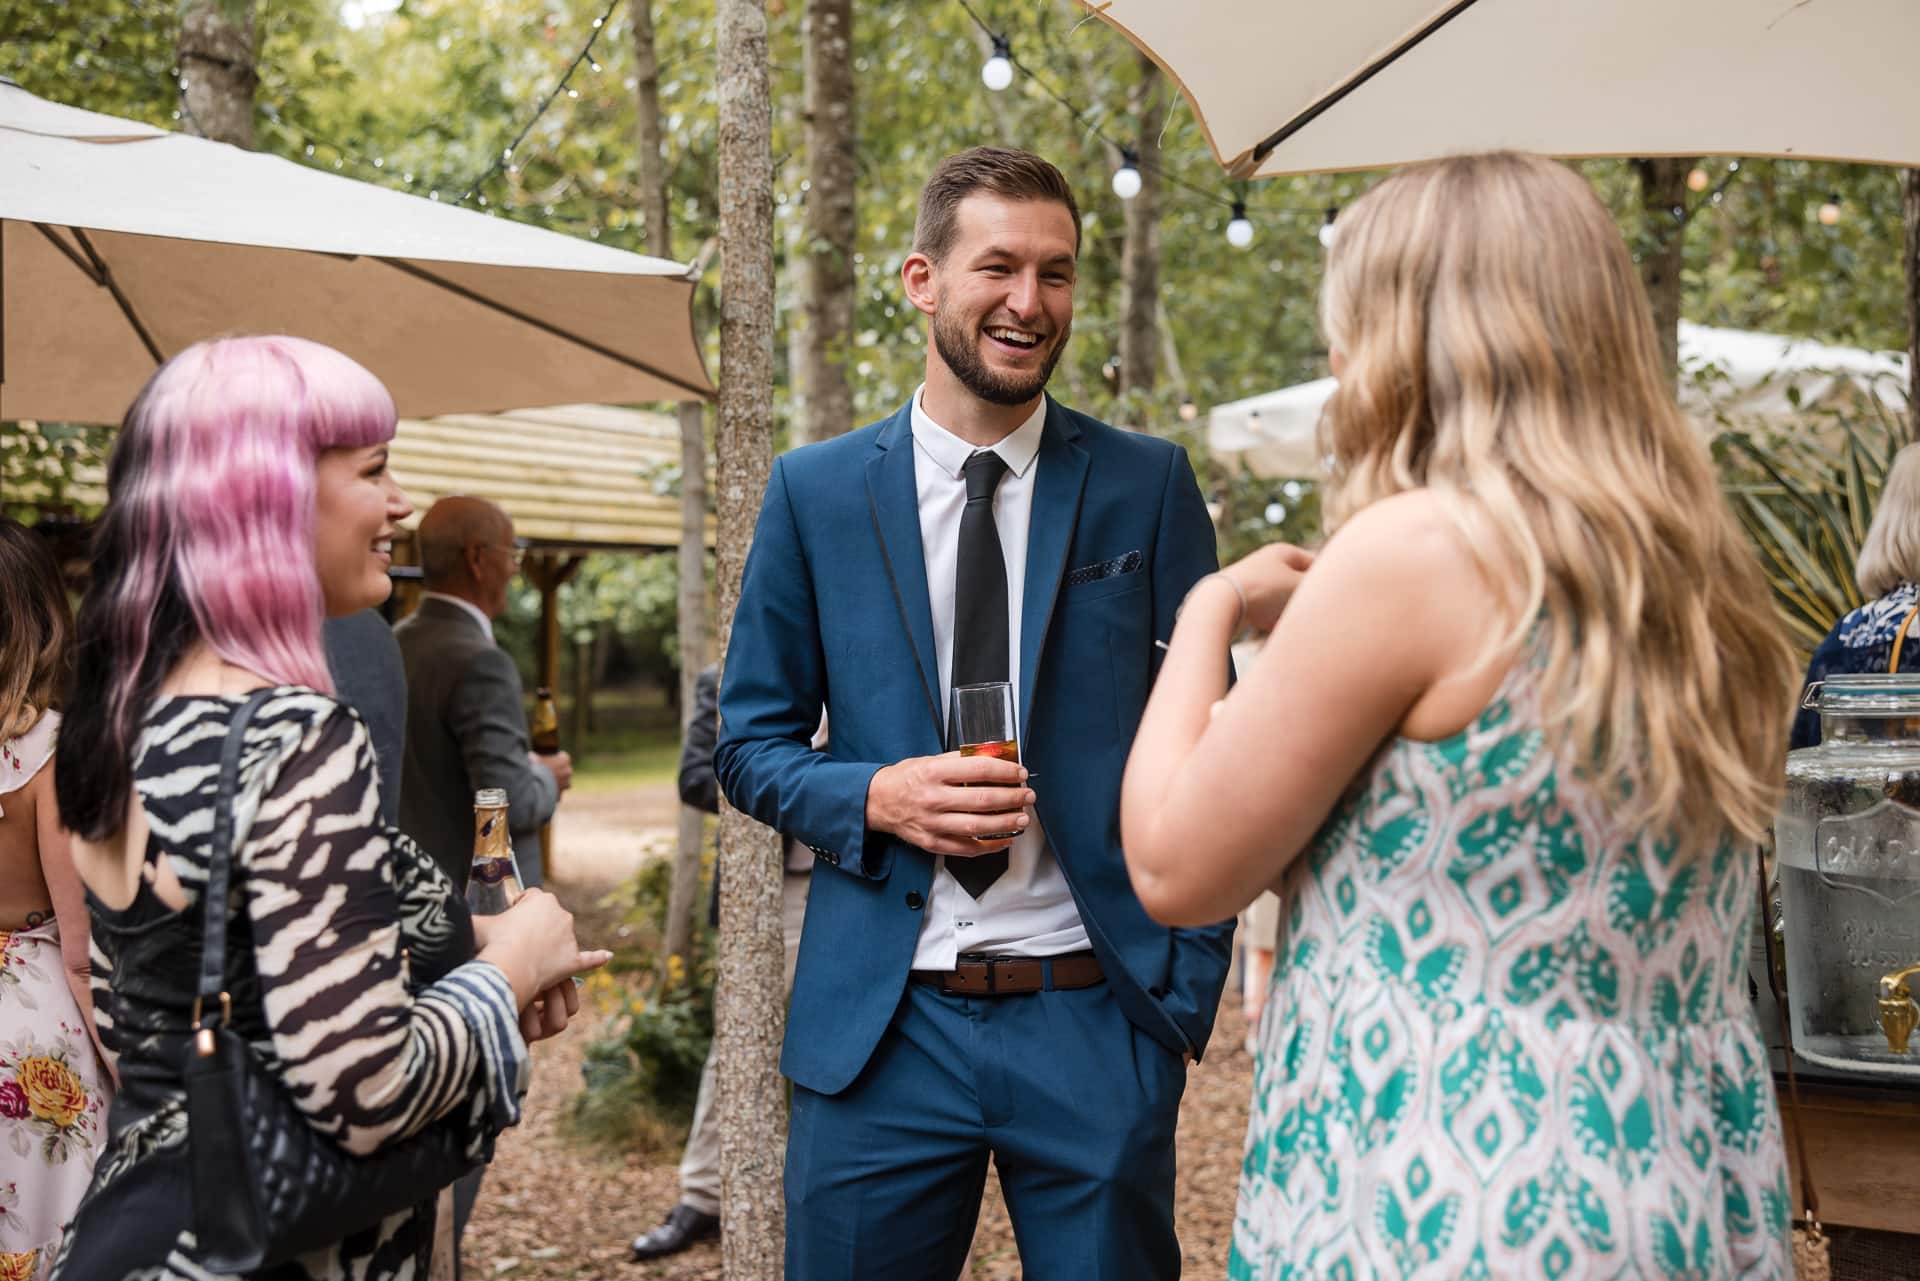 Guests laughing and drinking amongst the tree's at the Endeavour Woodland wedding venue